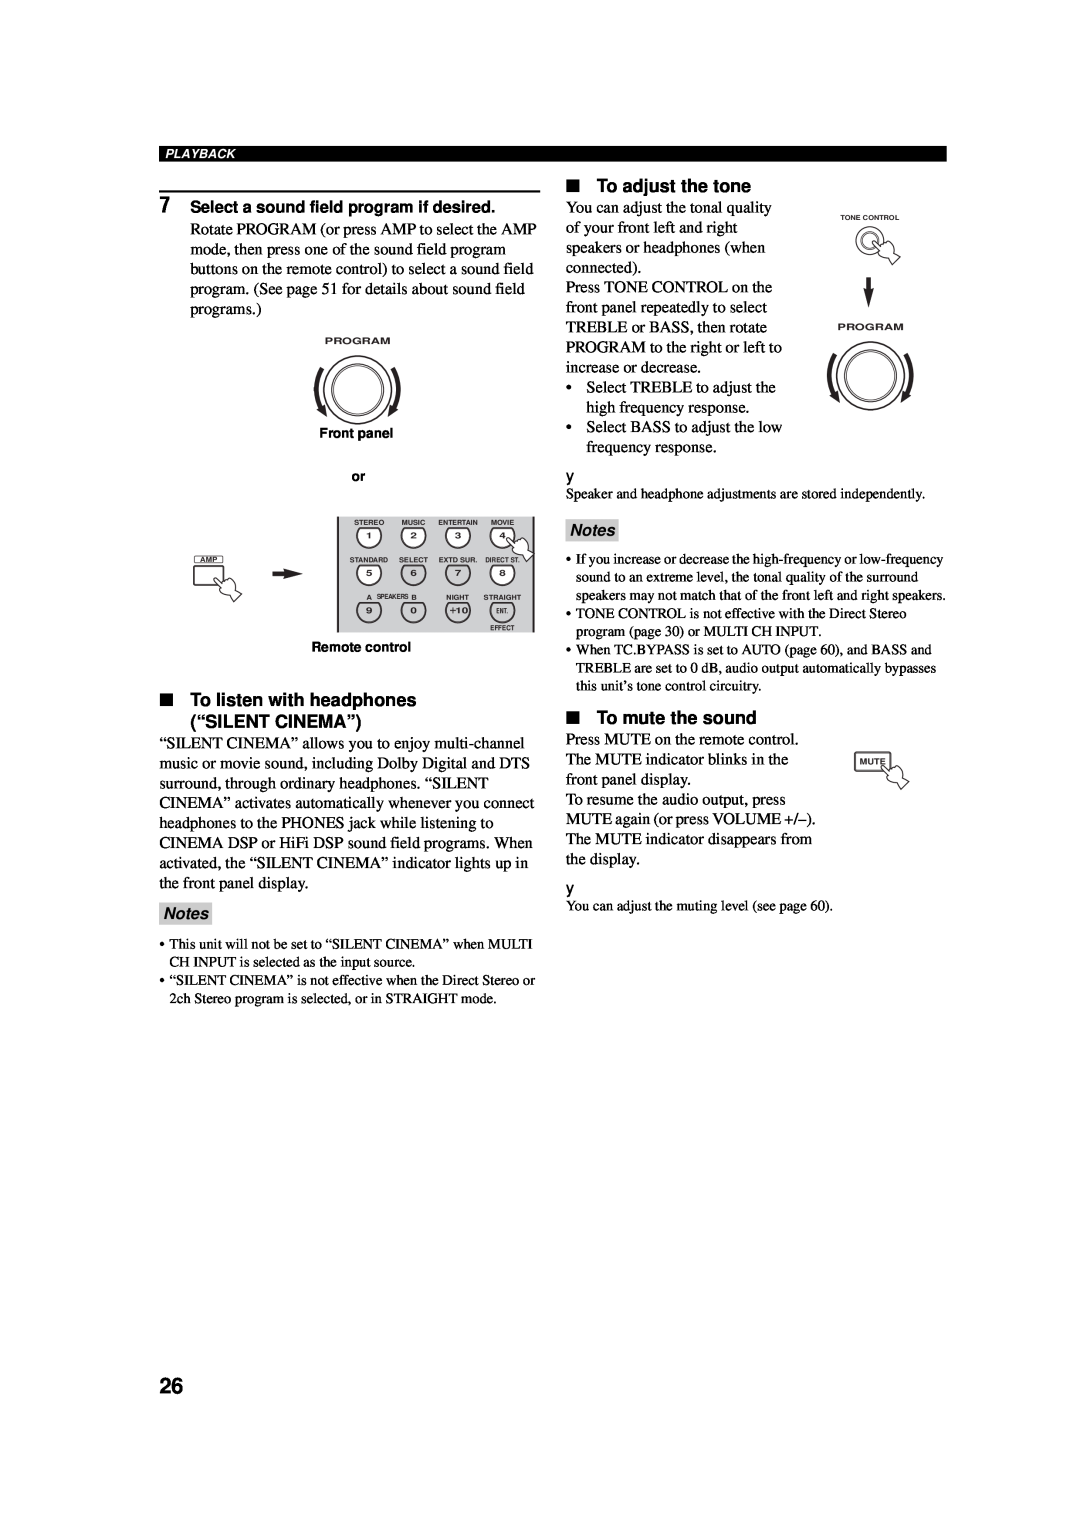 Yamaha AV Receiver owner manual To listen with headphones “SILENT CINEMA”, To adjust the tone, To mute the sound, Notes 